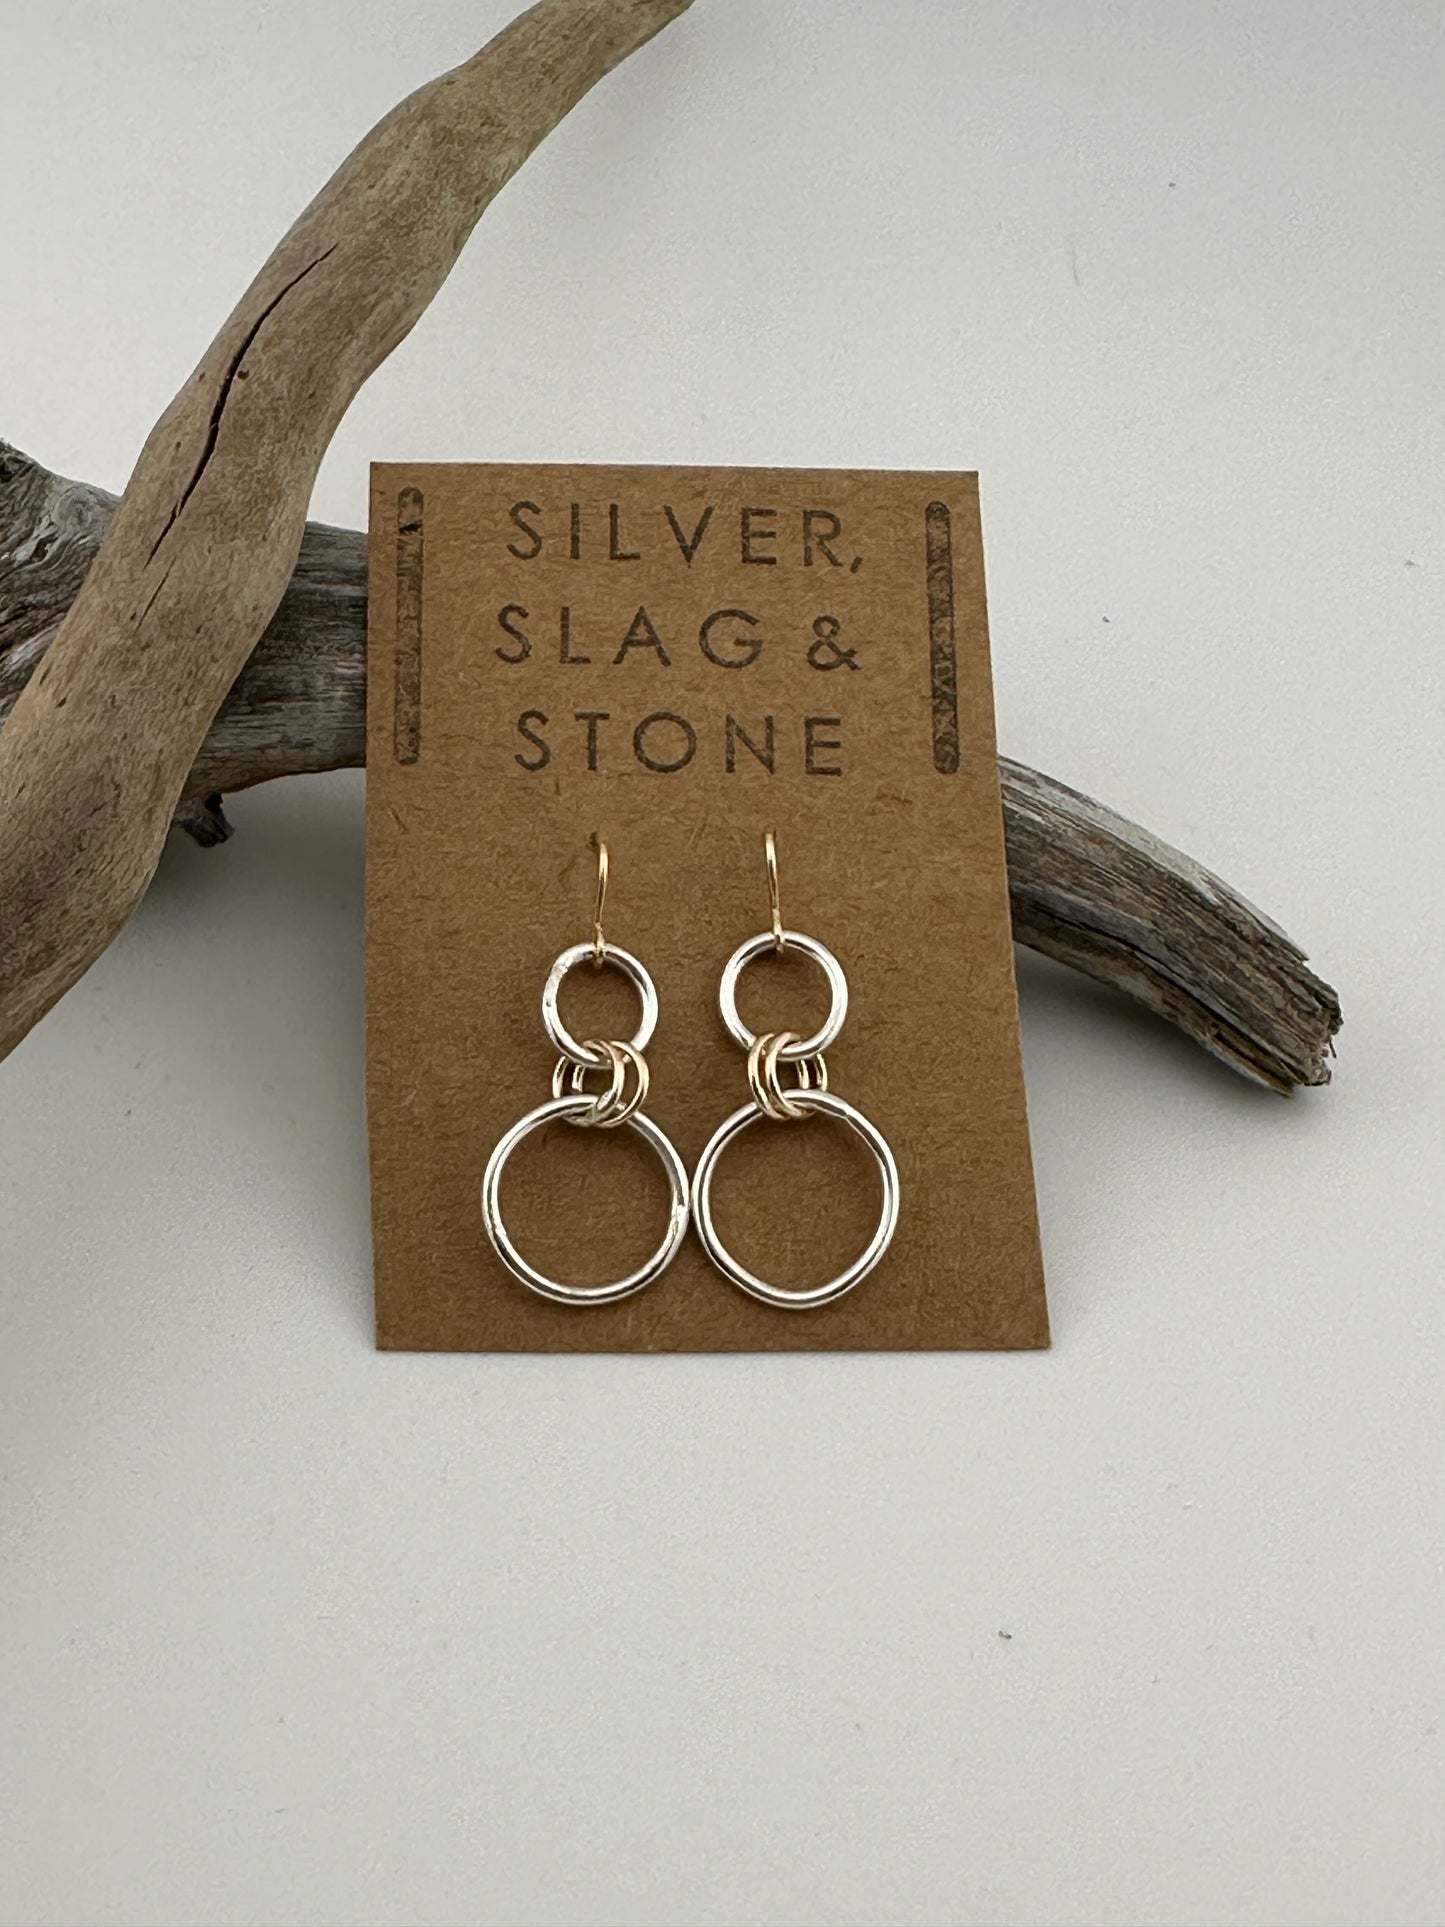 Silver & Gold Circle Earrings